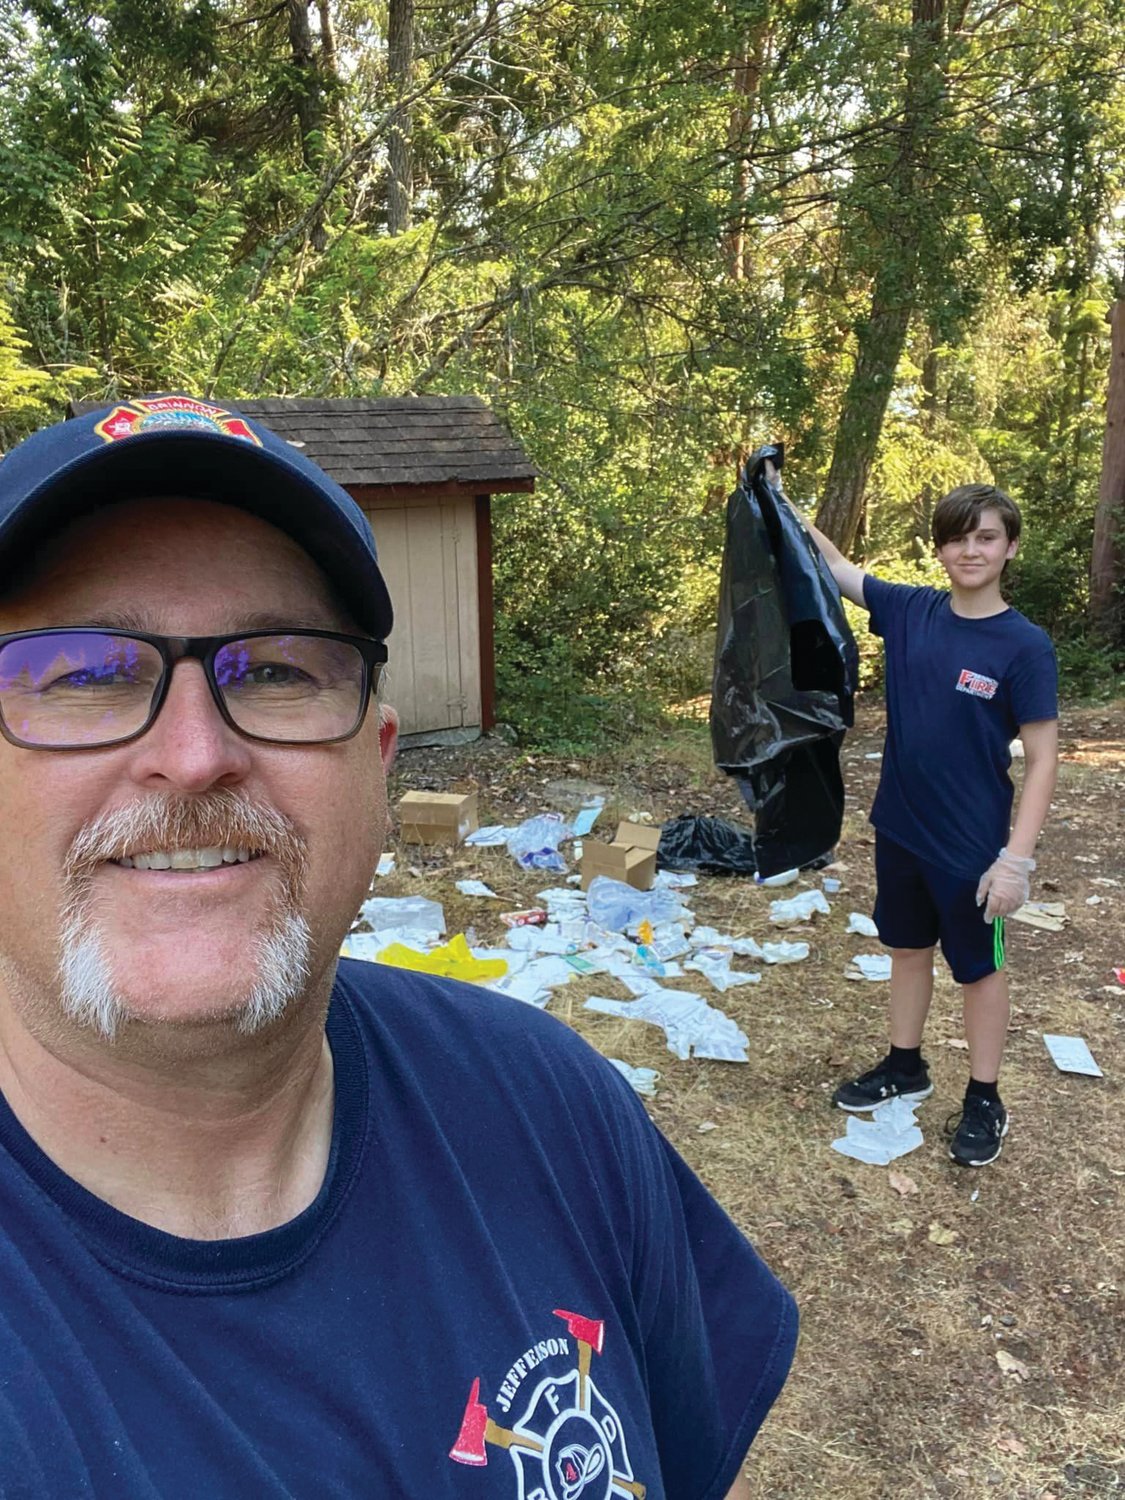 Brinnon Fire Commissioner Justin Matheson brought his son Tyler back to the scene all gloved up in order to help pick up the trash.